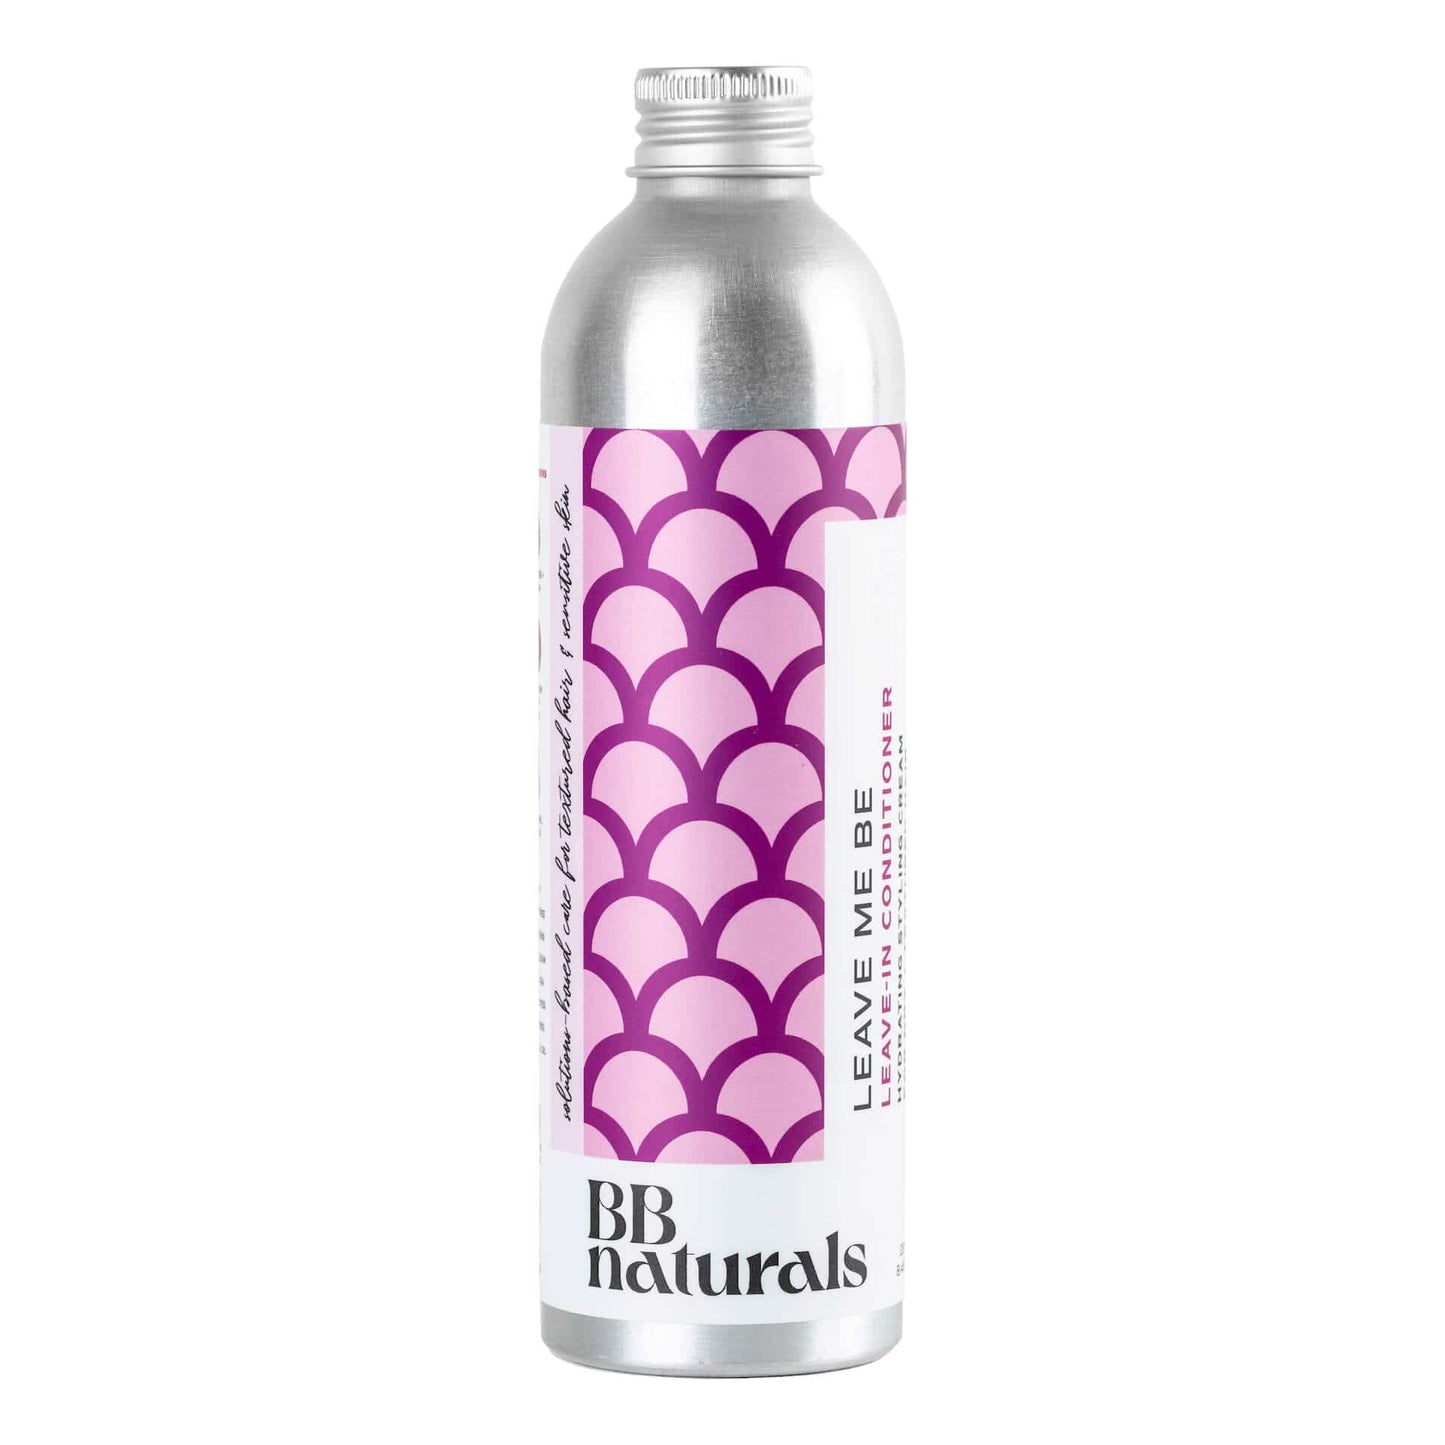 Bourn Beautiful Naturals Conditioners Leave Me Be Leave-In Conditioner